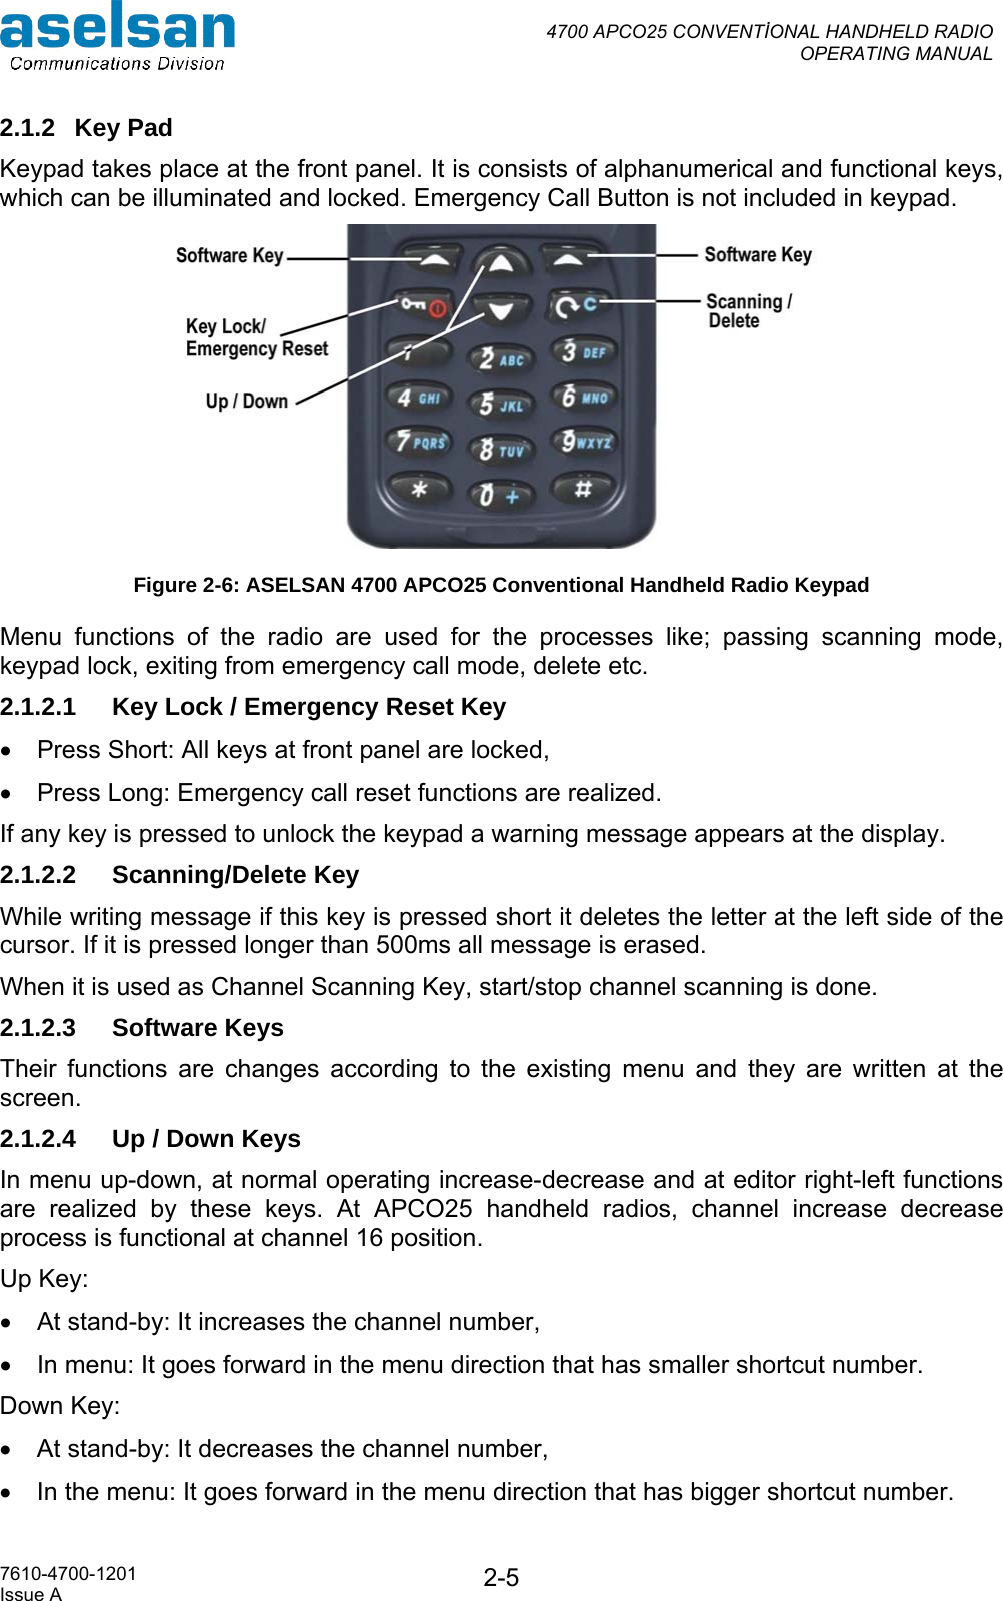  4700 APCO25 CONVENTİONAL HANDHELD RADIO  OPERATING MANUAL   7610-4700-1201 Issue A  2-52.1.2 Key Pad Keypad takes place at the front panel. It is consists of alphanumerical and functional keys, which can be illuminated and locked. Emergency Call Button is not included in keypad.  Figure 2-6: ASELSAN 4700 APCO25 Conventional Handheld Radio Keypad Menu functions of the radio are used for the processes like; passing scanning mode, keypad lock, exiting from emergency call mode, delete etc. 2.1.2.1  Key Lock / Emergency Reset Key •  Press Short: All keys at front panel are locked, •  Press Long: Emergency call reset functions are realized. If any key is pressed to unlock the keypad a warning message appears at the display. 2.1.2.2 Scanning/Delete Key While writing message if this key is pressed short it deletes the letter at the left side of the cursor. If it is pressed longer than 500ms all message is erased.  When it is used as Channel Scanning Key, start/stop channel scanning is done. 2.1.2.3 Software Keys  Their functions are changes according to the existing menu and they are written at the screen. 2.1.2.4  Up / Down Keys In menu up-down, at normal operating increase-decrease and at editor right-left functions are realized by these keys. At APCO25 handheld radios, channel increase decrease process is functional at channel 16 position.  Up Key:  •  At stand-by: It increases the channel number, •  In menu: It goes forward in the menu direction that has smaller shortcut number. Down Key:  •  At stand-by: It decreases the channel number, •  In the menu: It goes forward in the menu direction that has bigger shortcut number. 